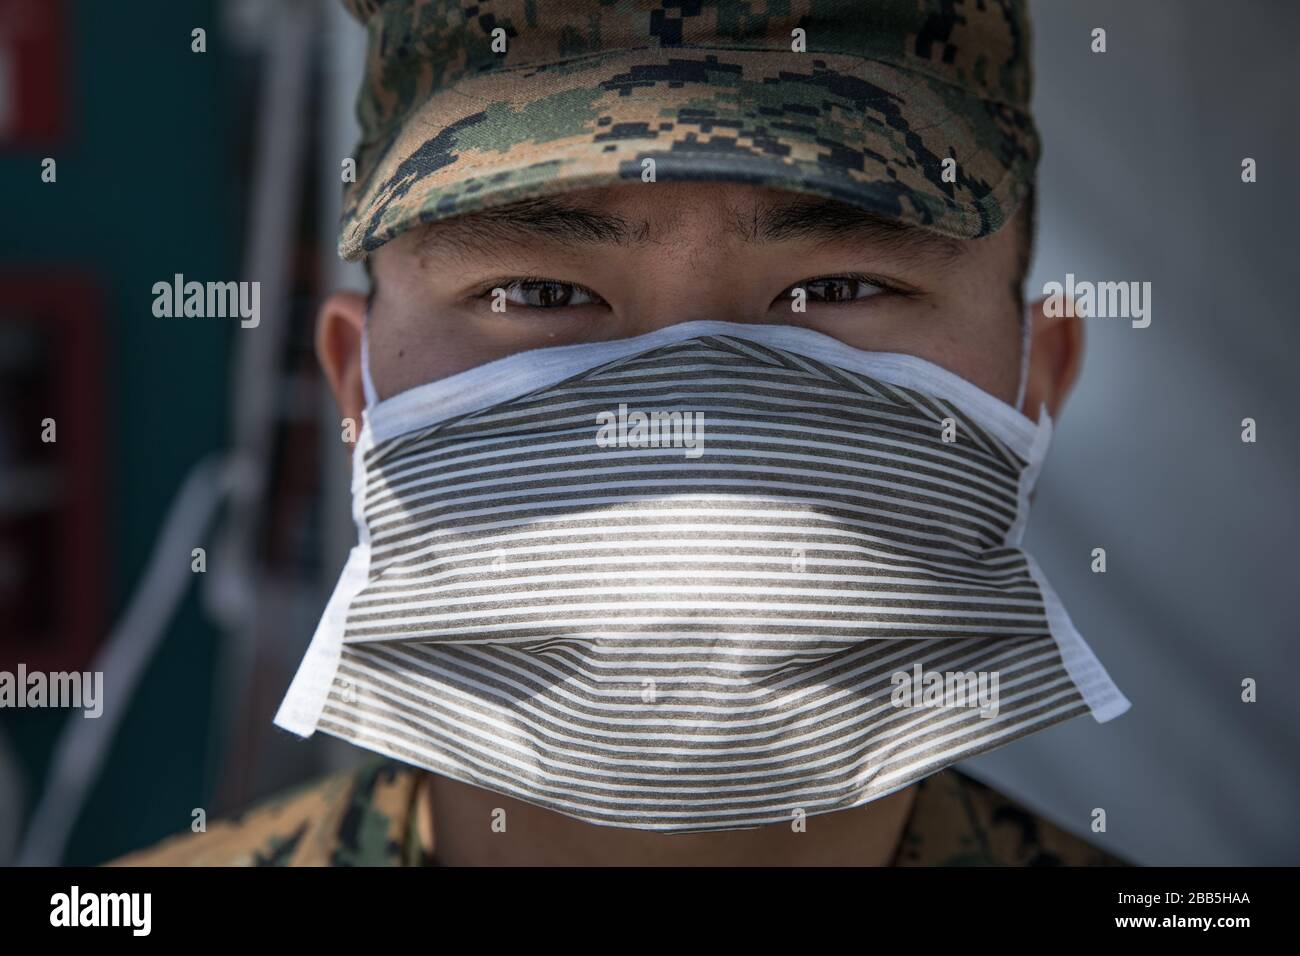 Los Angeles, United States of America. 29 March, 2020. U.S. U.S. Marine Pfc. Brandon Shim, wearing personal protective equipment, guards the checkpoint for the Military Sealift Command hospital ship USNS Mercy as it begins treating patients in support of the COVID-19 pandemic March 29, 2020 in Los Angeles, California. Credit: Alexa Hernandez/U.S. Navy Photo/Alamy Live News Stock Photo